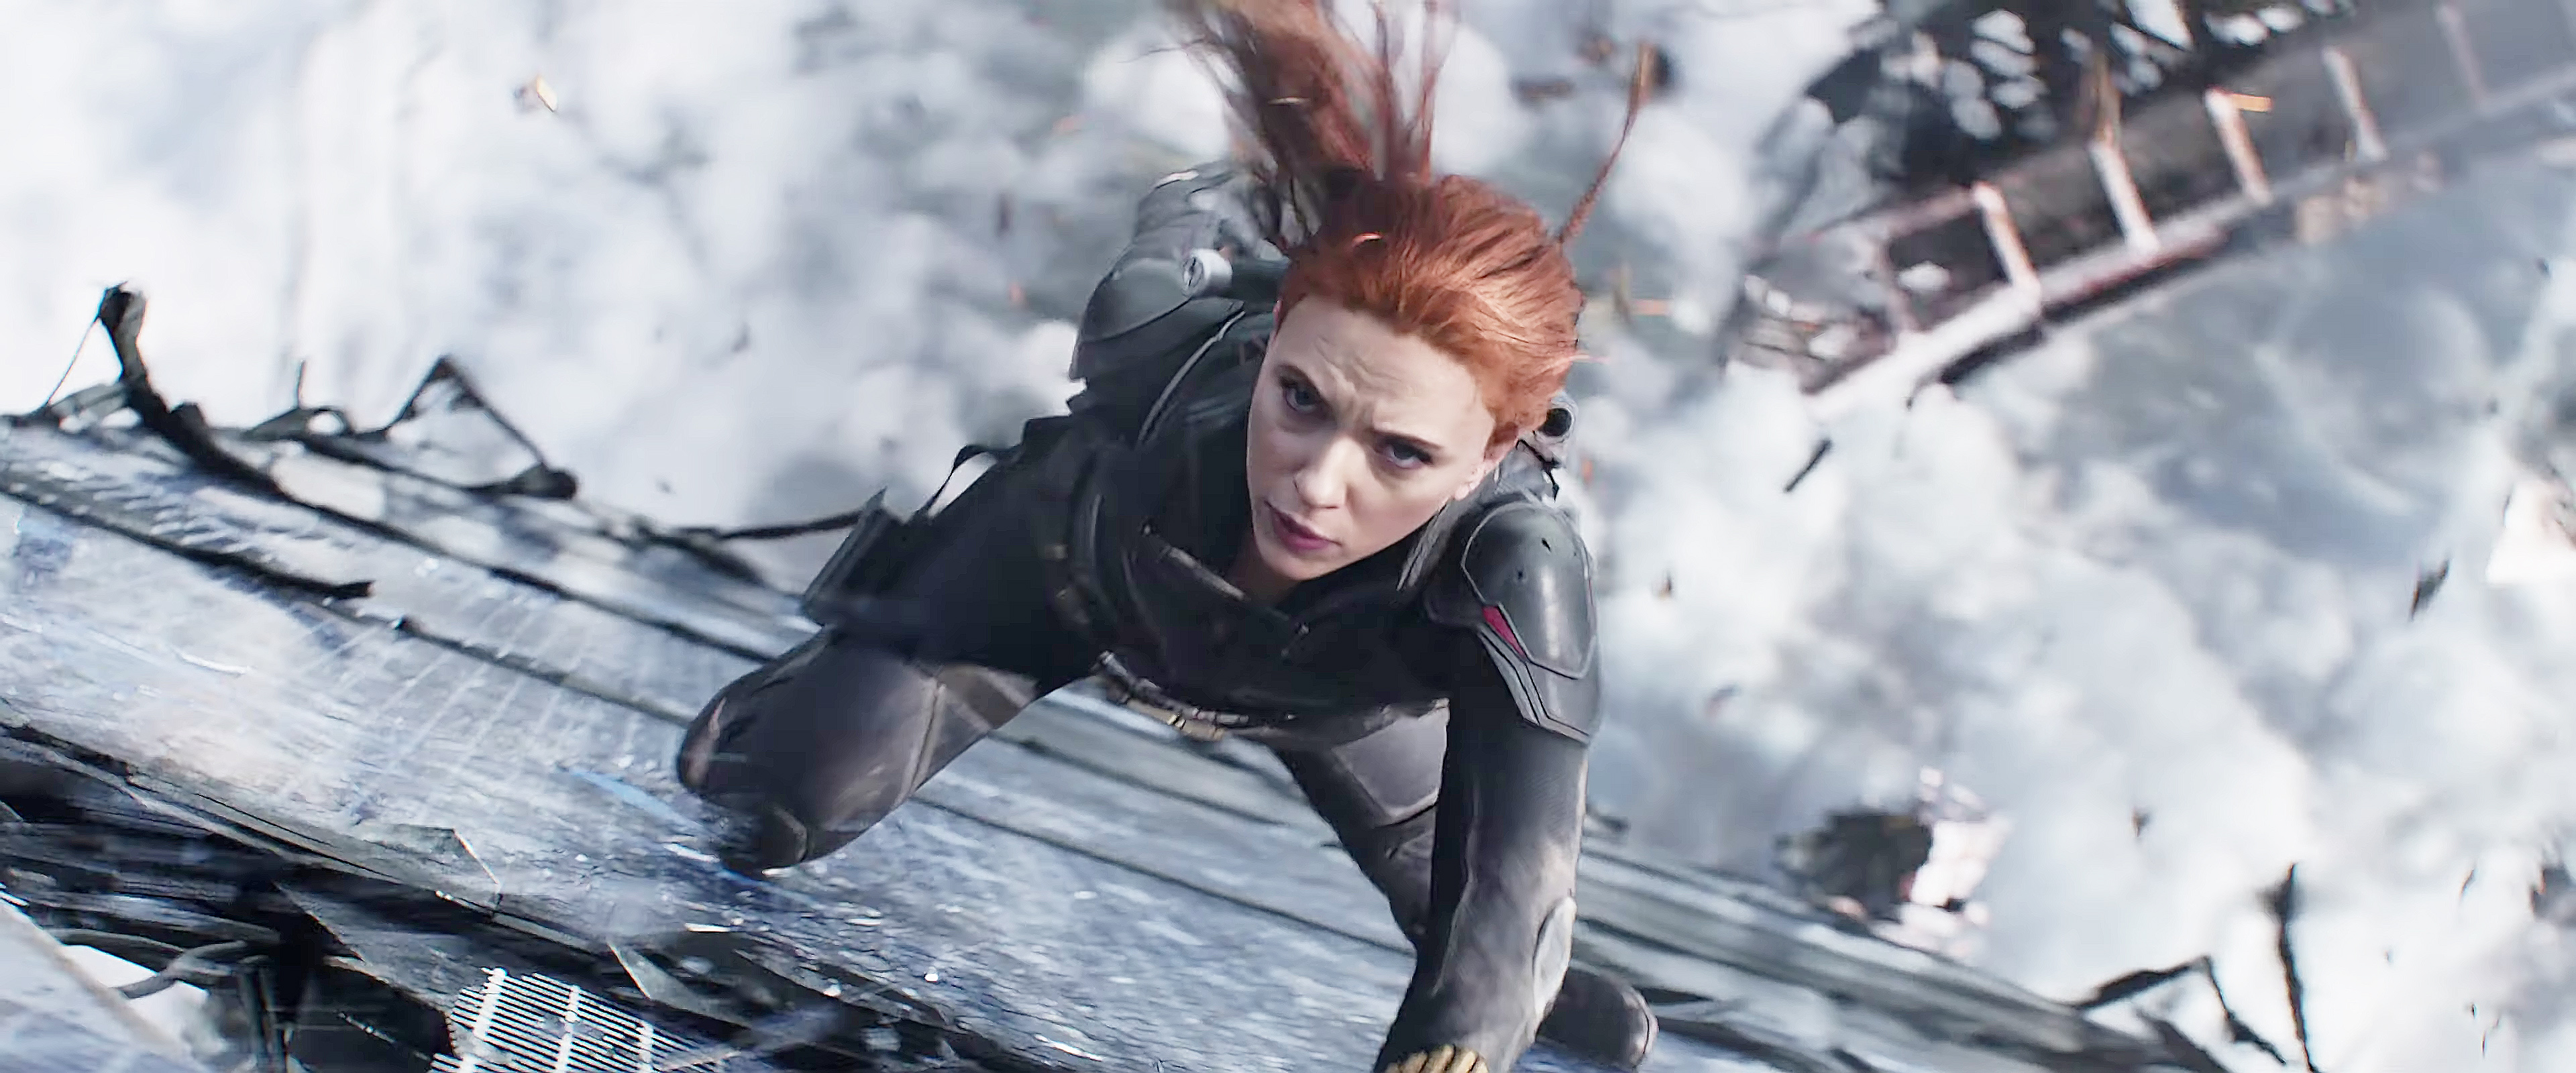 4k Screencaps Fanart From Black Widow And A New Poster